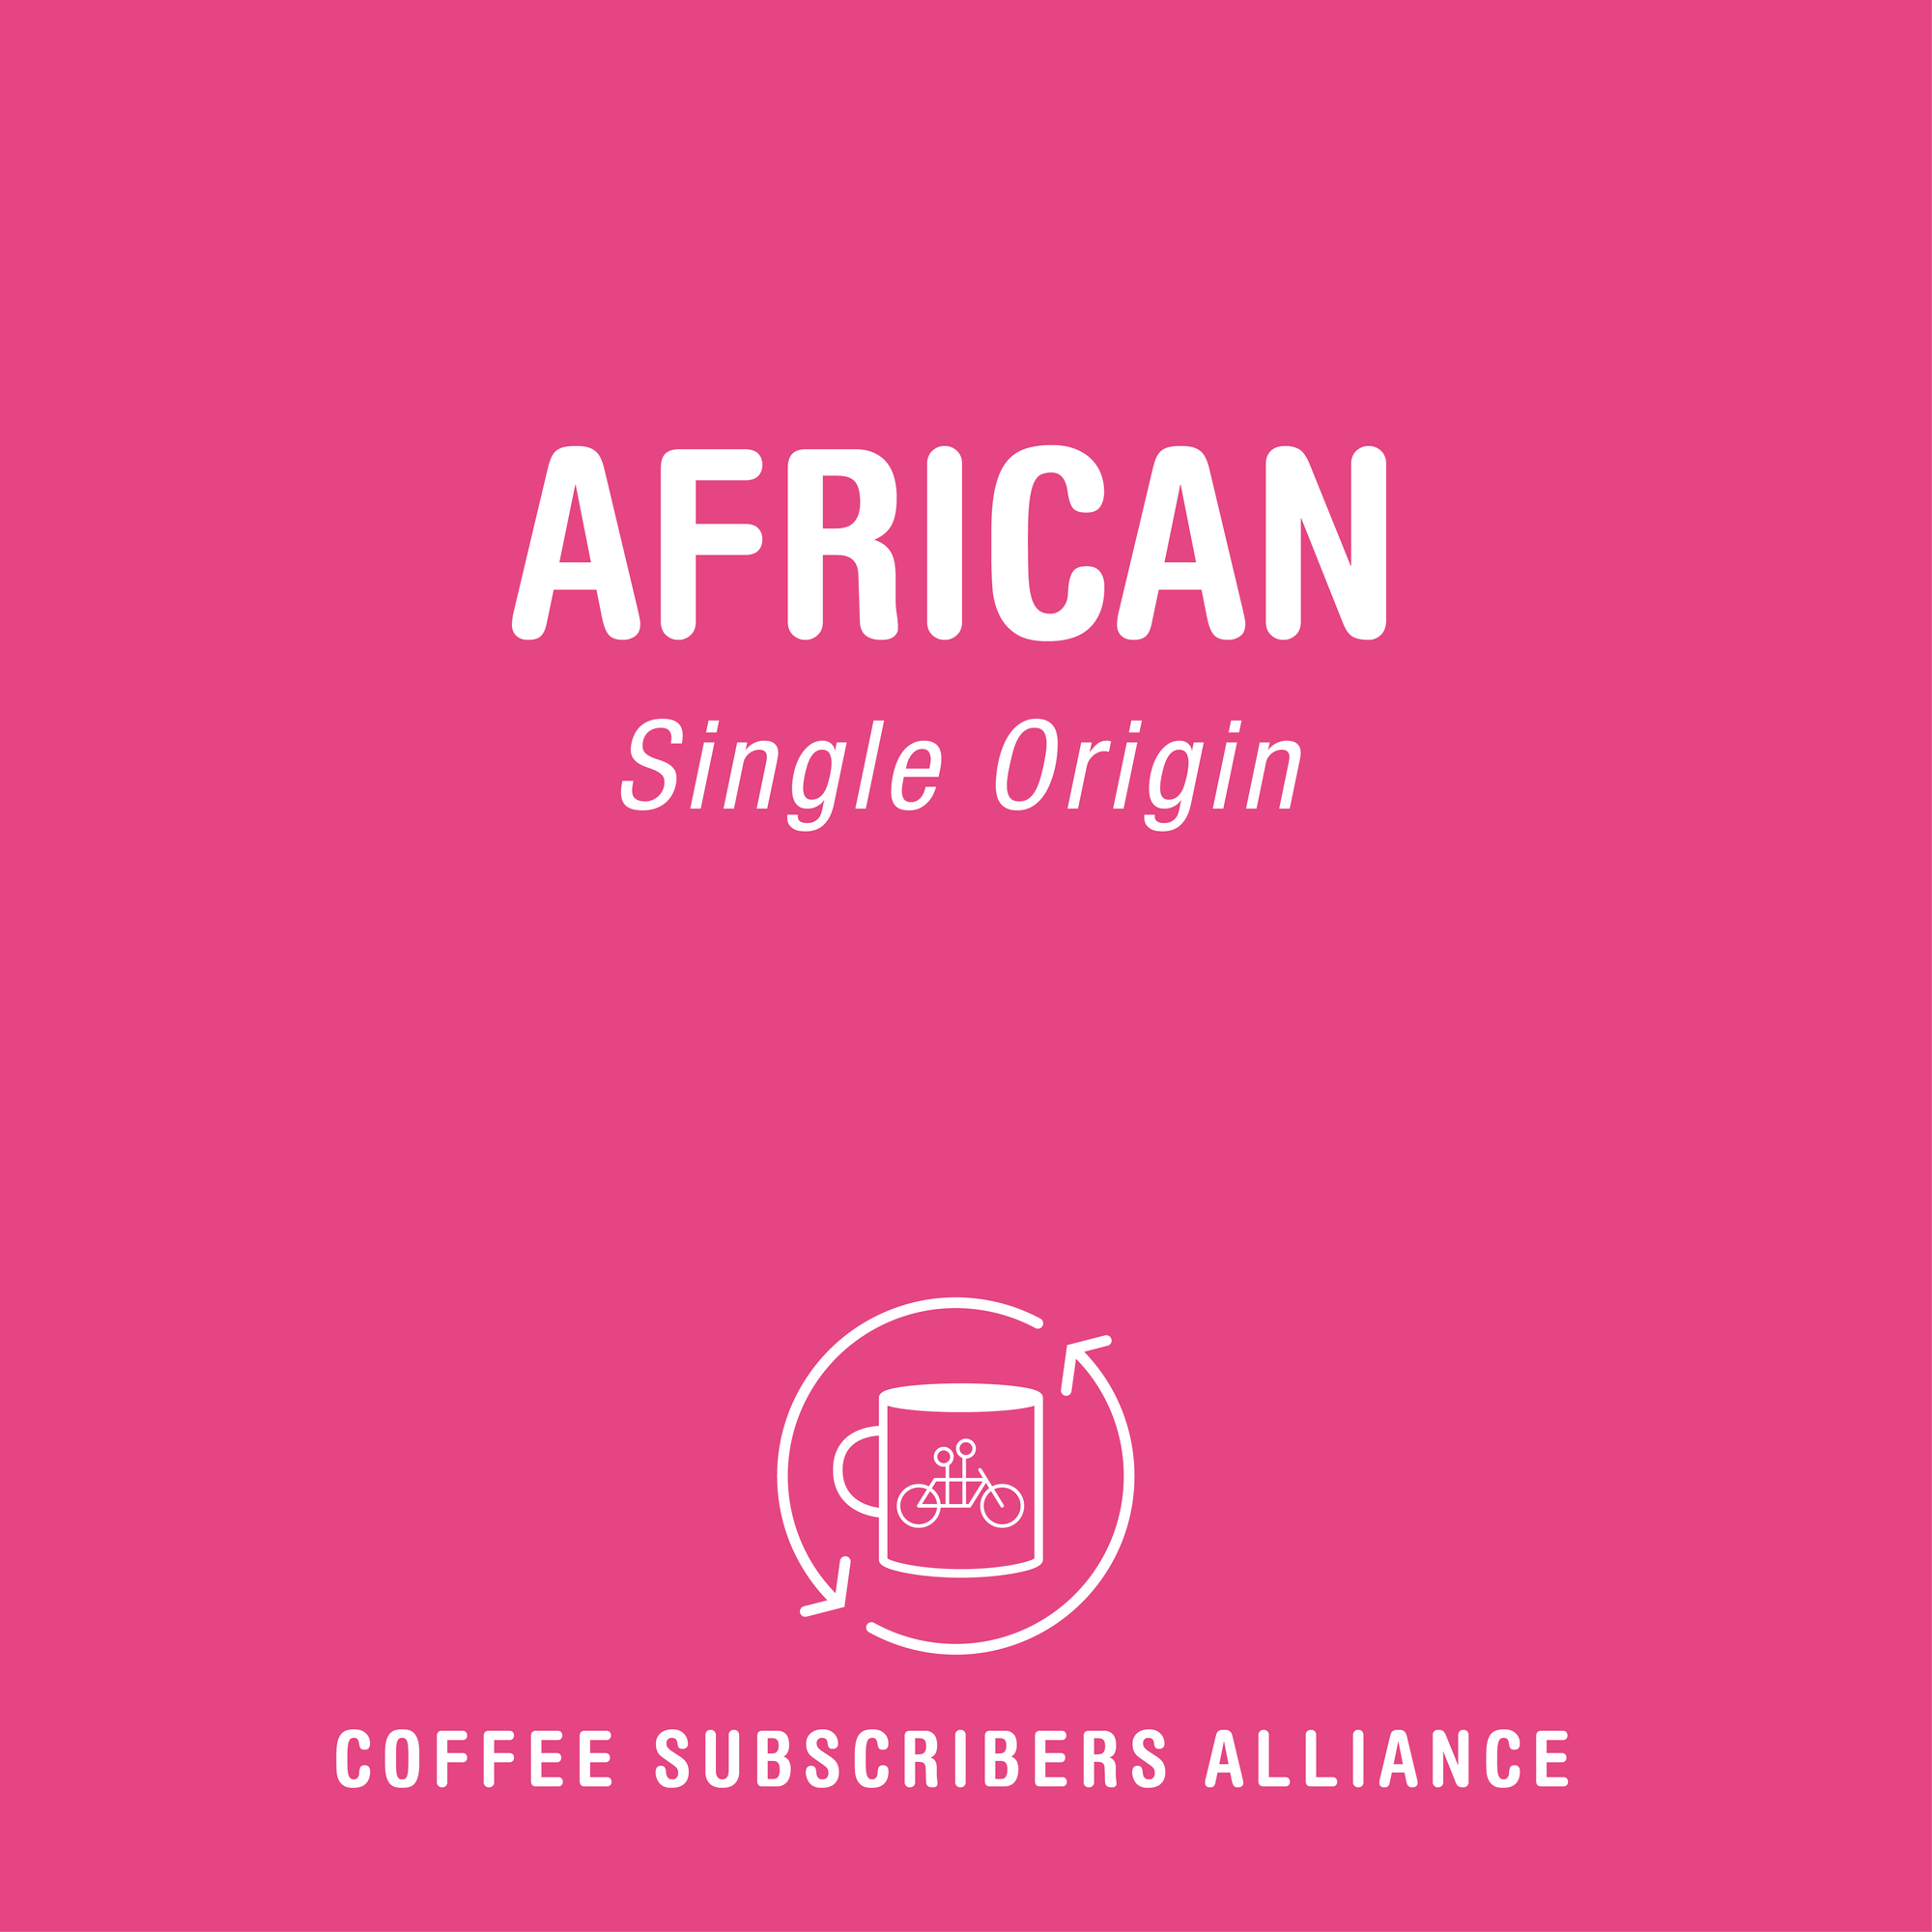 Pink background with text "African Subscription Gift - 8 Weeks x 6" and a logo of Tandem Coffee Roasters featuring a coffee cup and steam design, emphasizing an exclusive coffee selection.